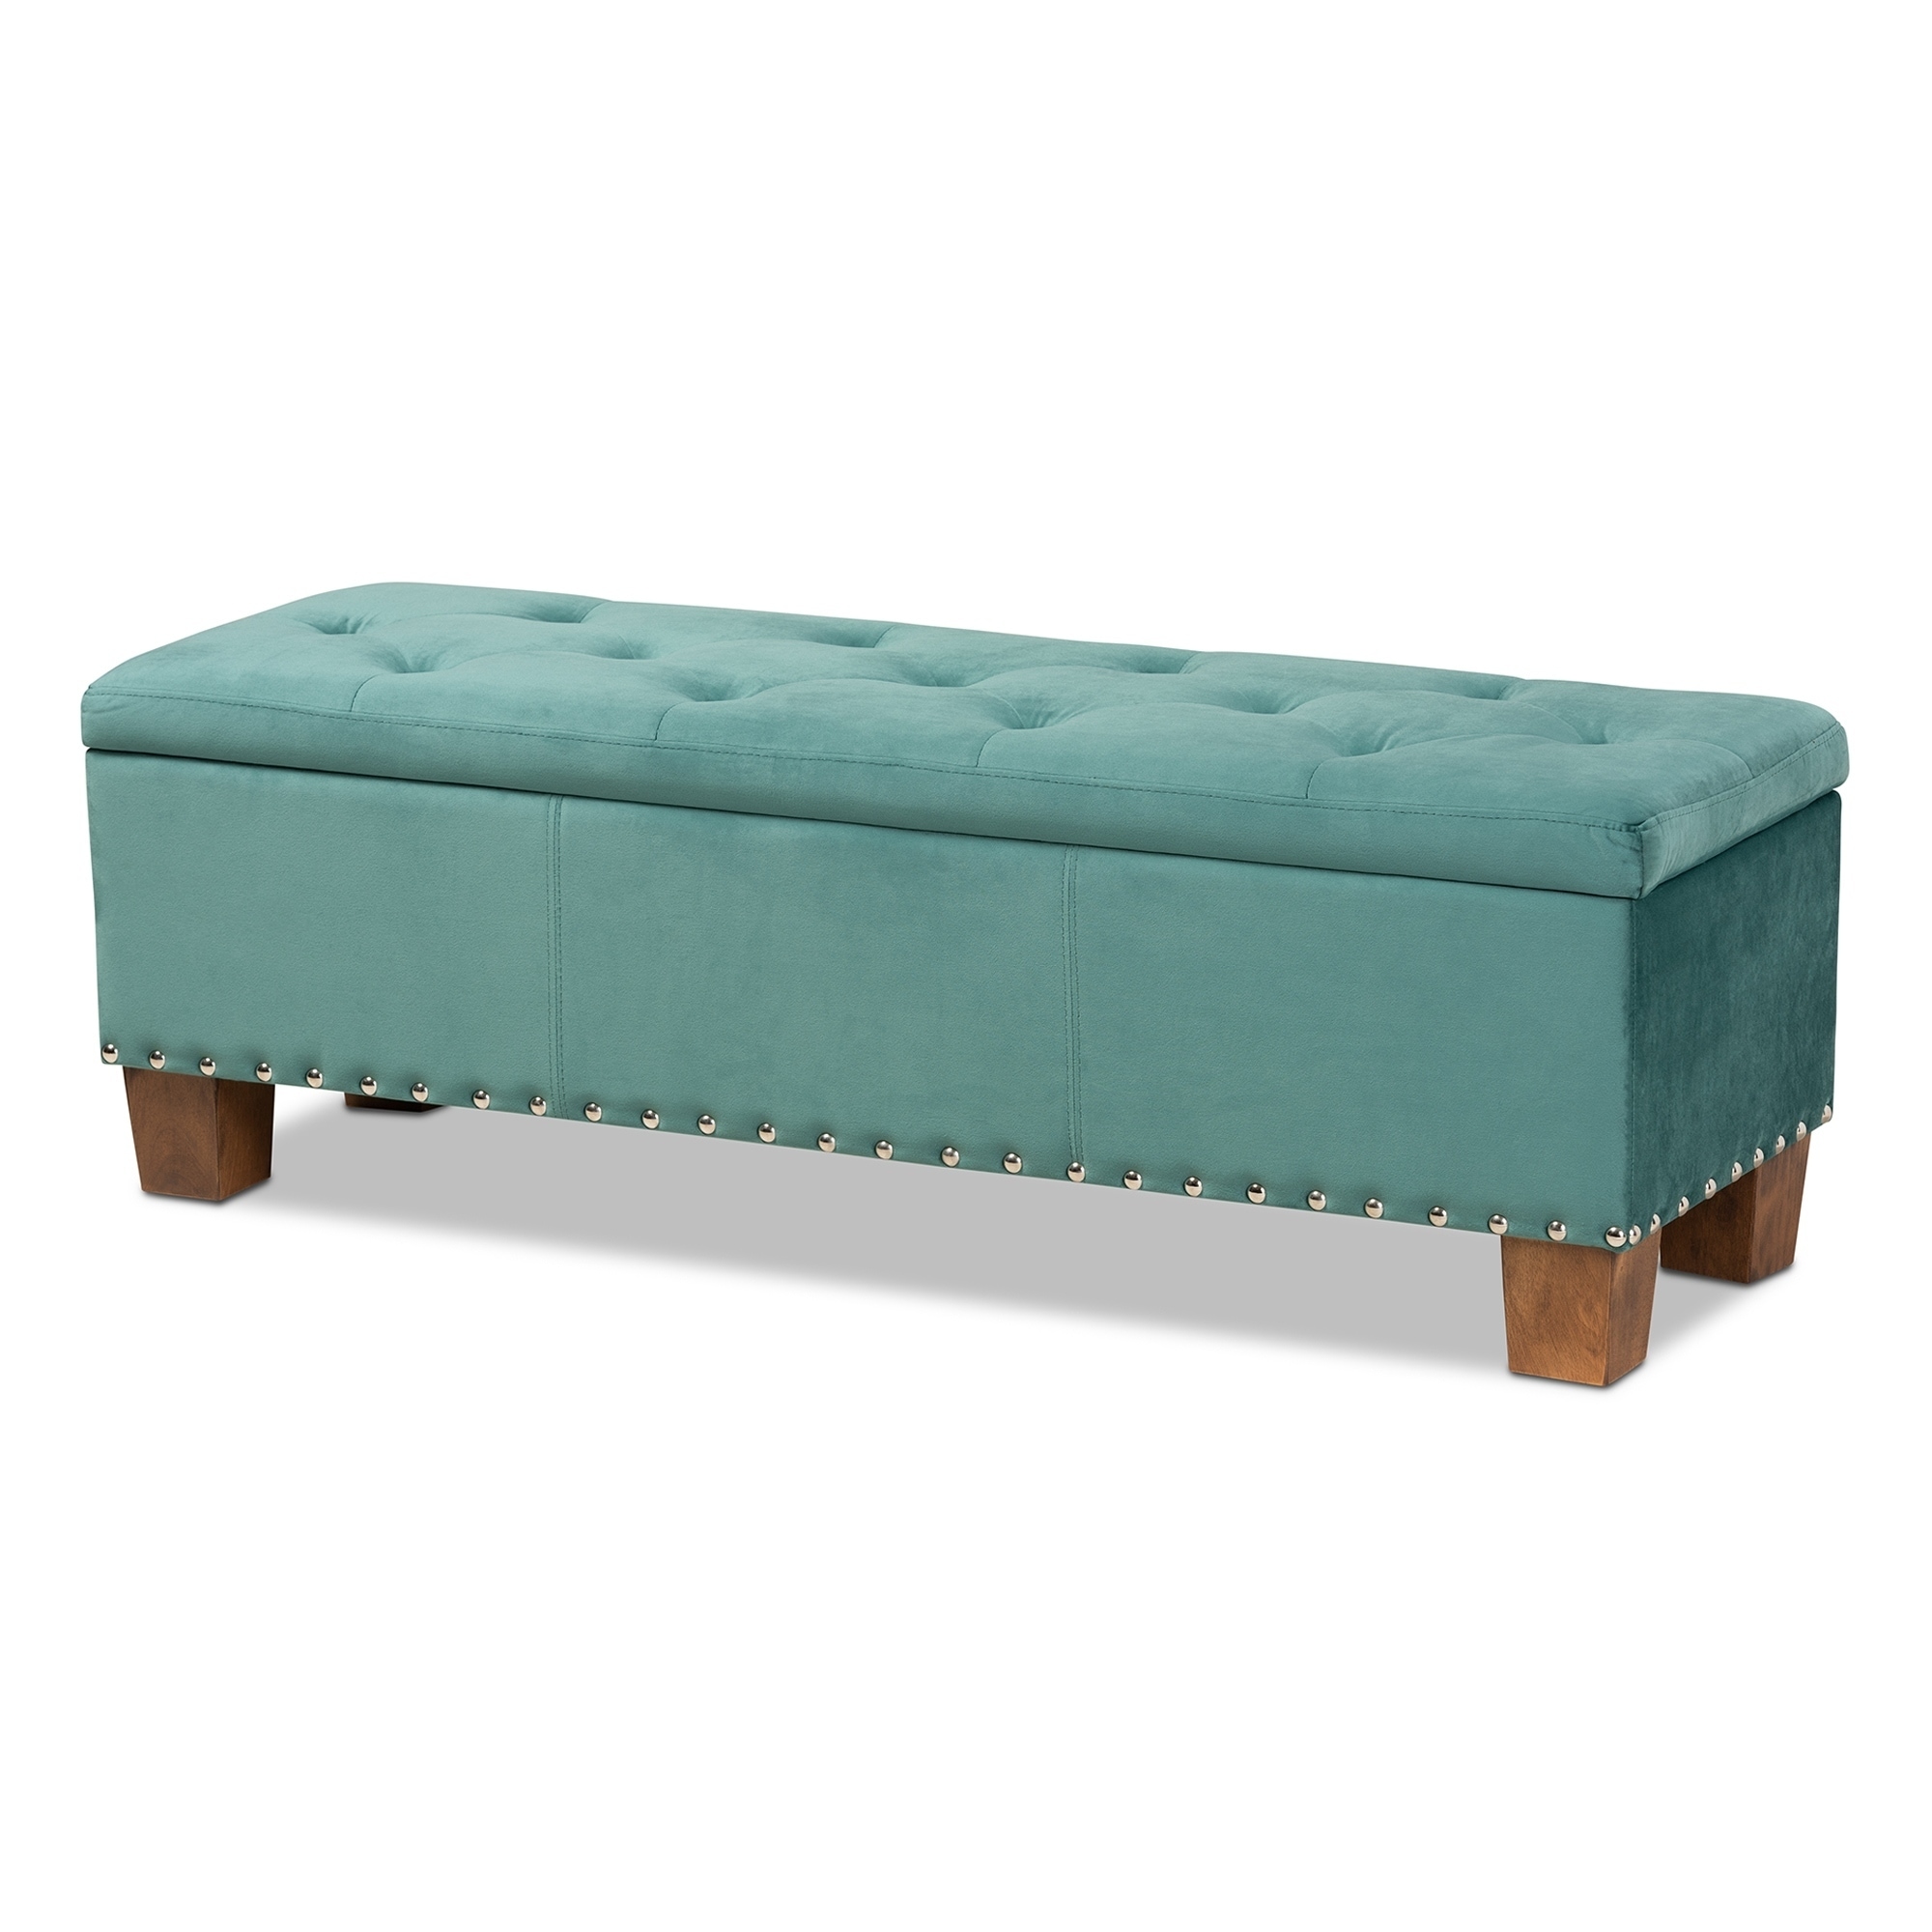 Carson Carrington Bahult Upholstered Button-tufted Storage Ottoman Bench